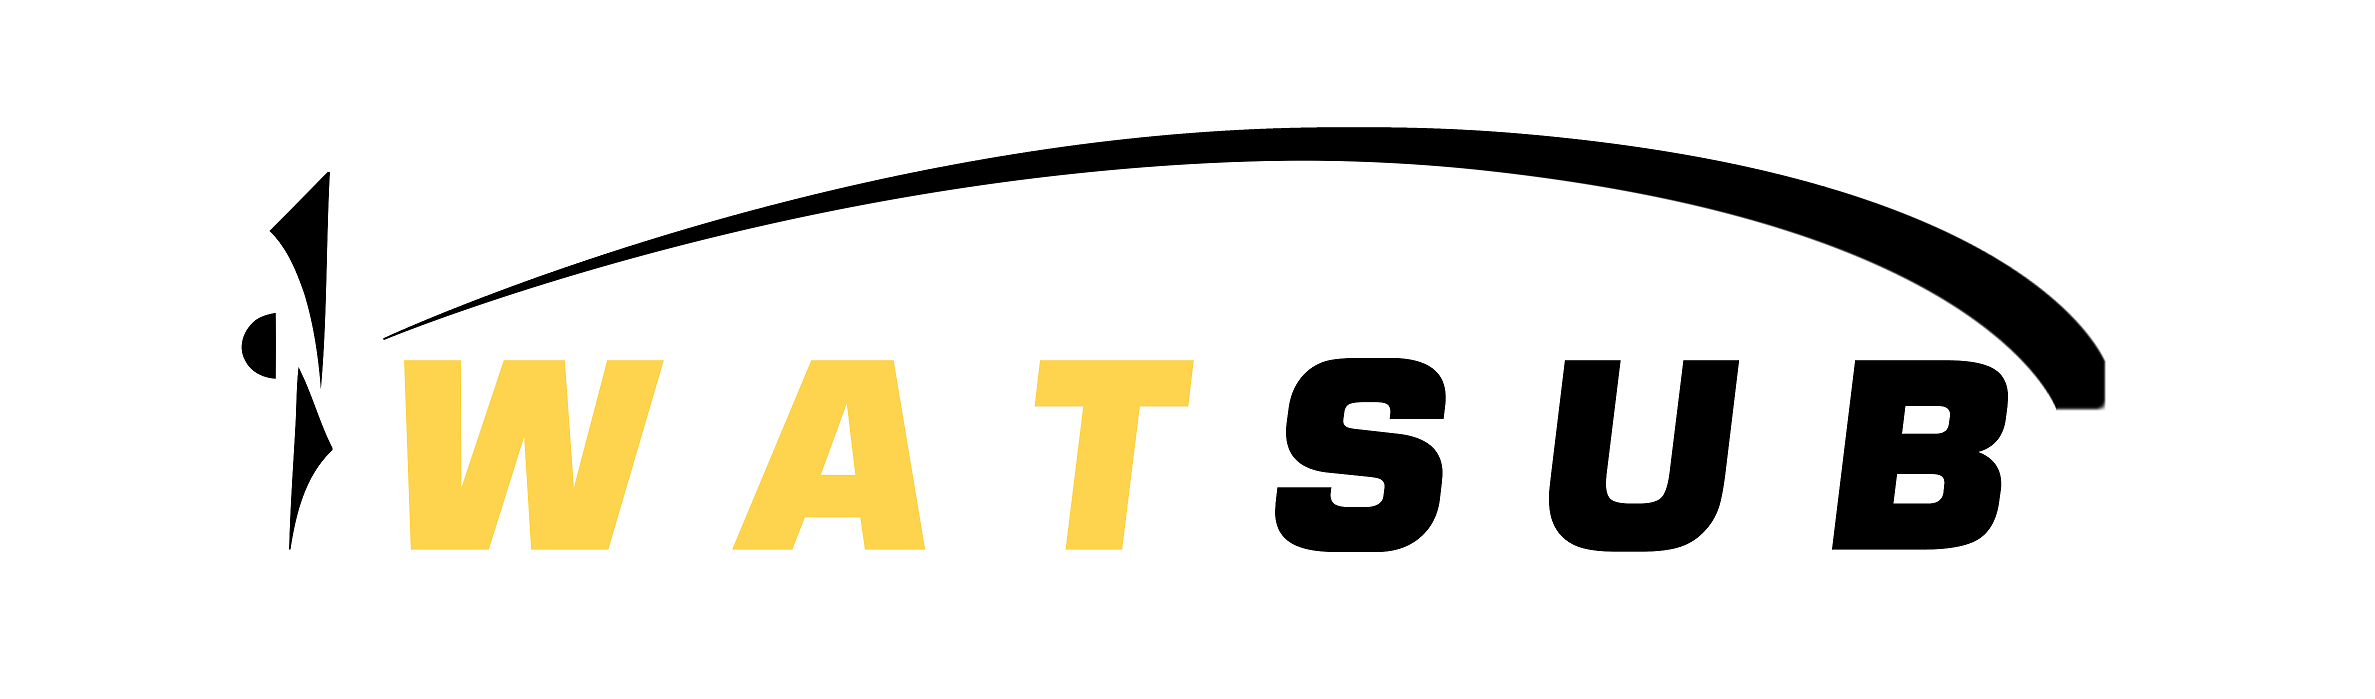 Simple lines WatSub logo in yellow and black